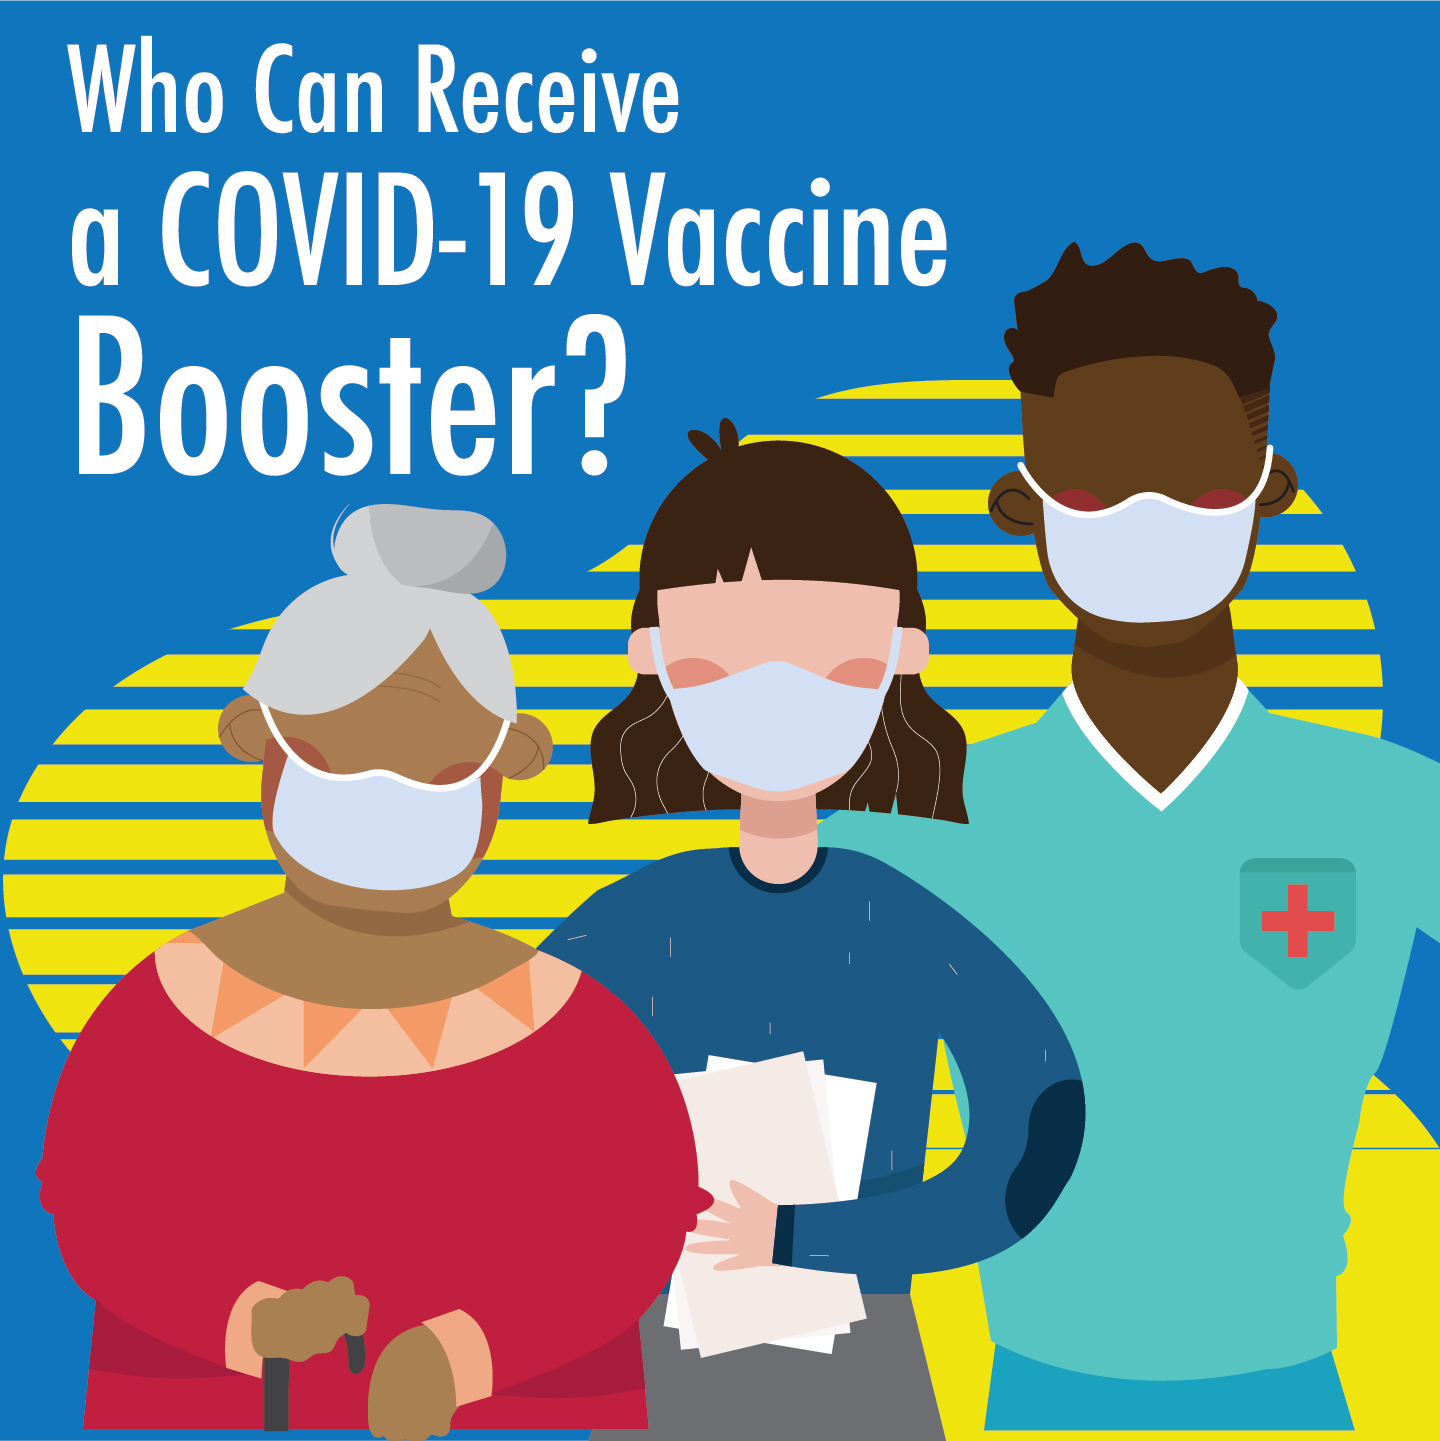 Reasons to get vaccinated against COVID-19